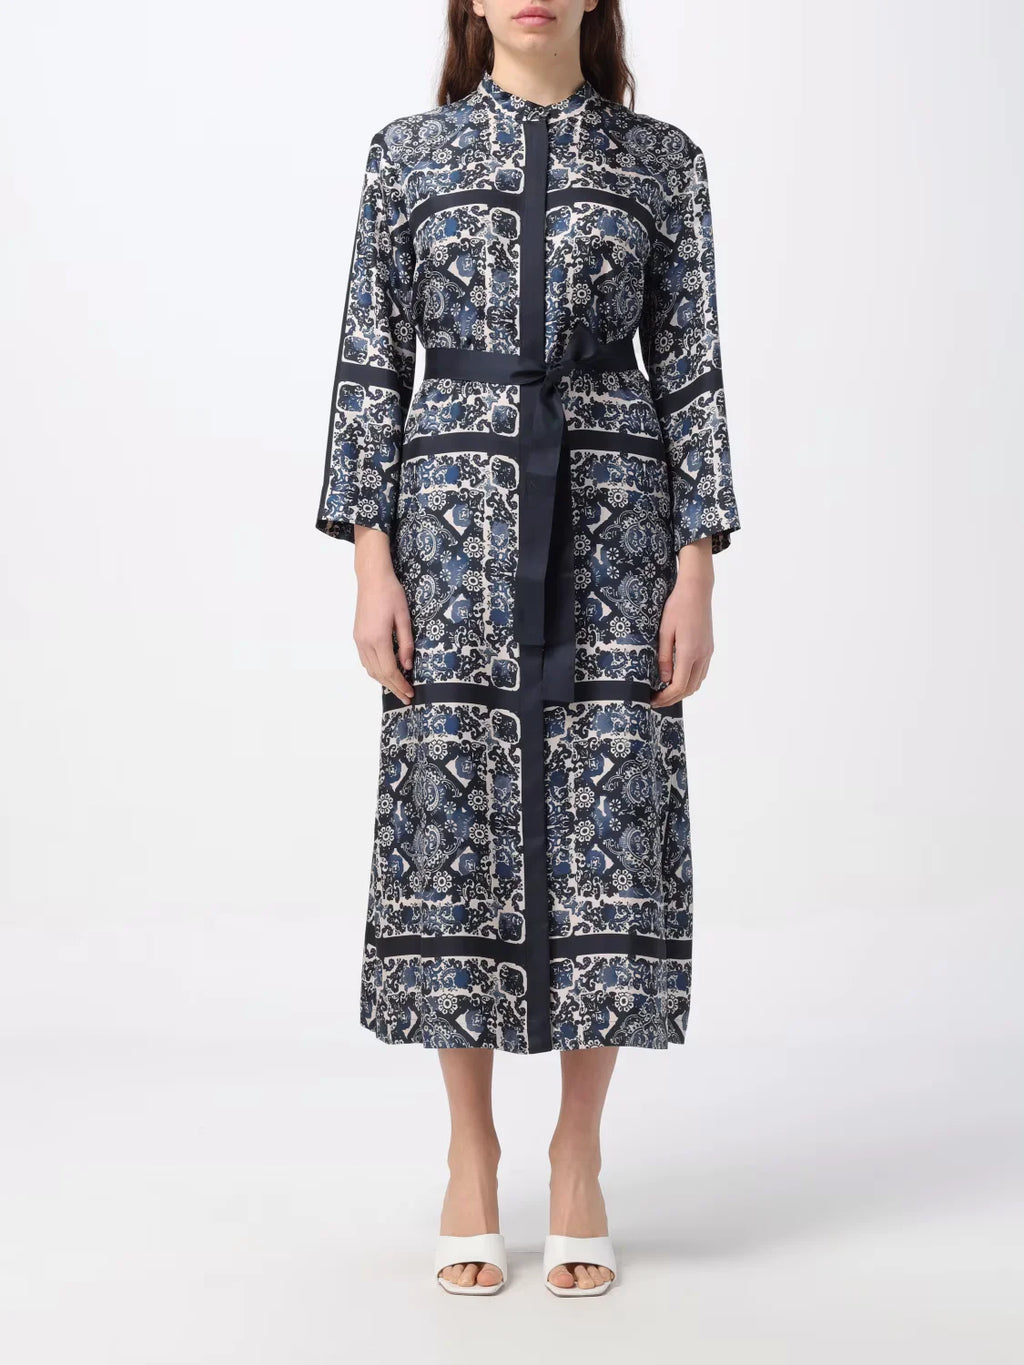 Elevate your style with the Max Mara Printed Silk Dress. The caftan-style dress is crafted from exquisite, printed silk that gives it a beautiful flow. With its slightly flared silhouette, mandarin collar, and matching belt, this dress accentuates your waist for a flattering look. Finished with hidden mother-of-pearl buttons and a back pleat for added elegance.